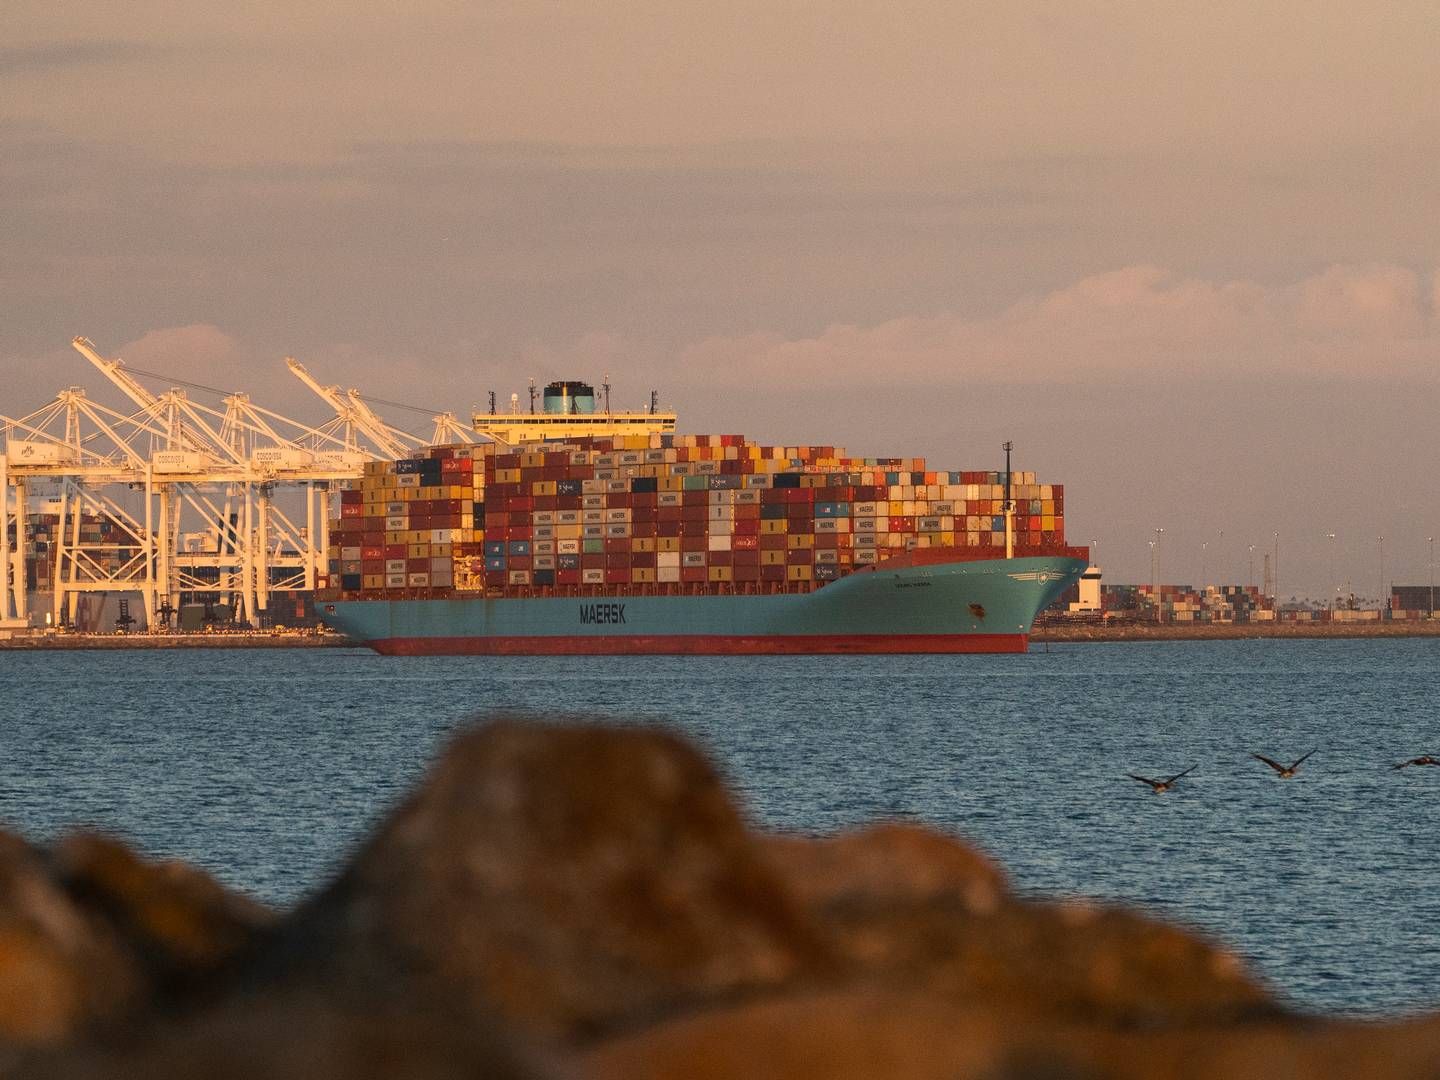 Stock photo. The image shows a Maersk ship in US waters, but is otherwise unrelated to the infringement cases mentioned in the article. | Photo: Jon Nazca/Reuters/Ritzau Scanpix